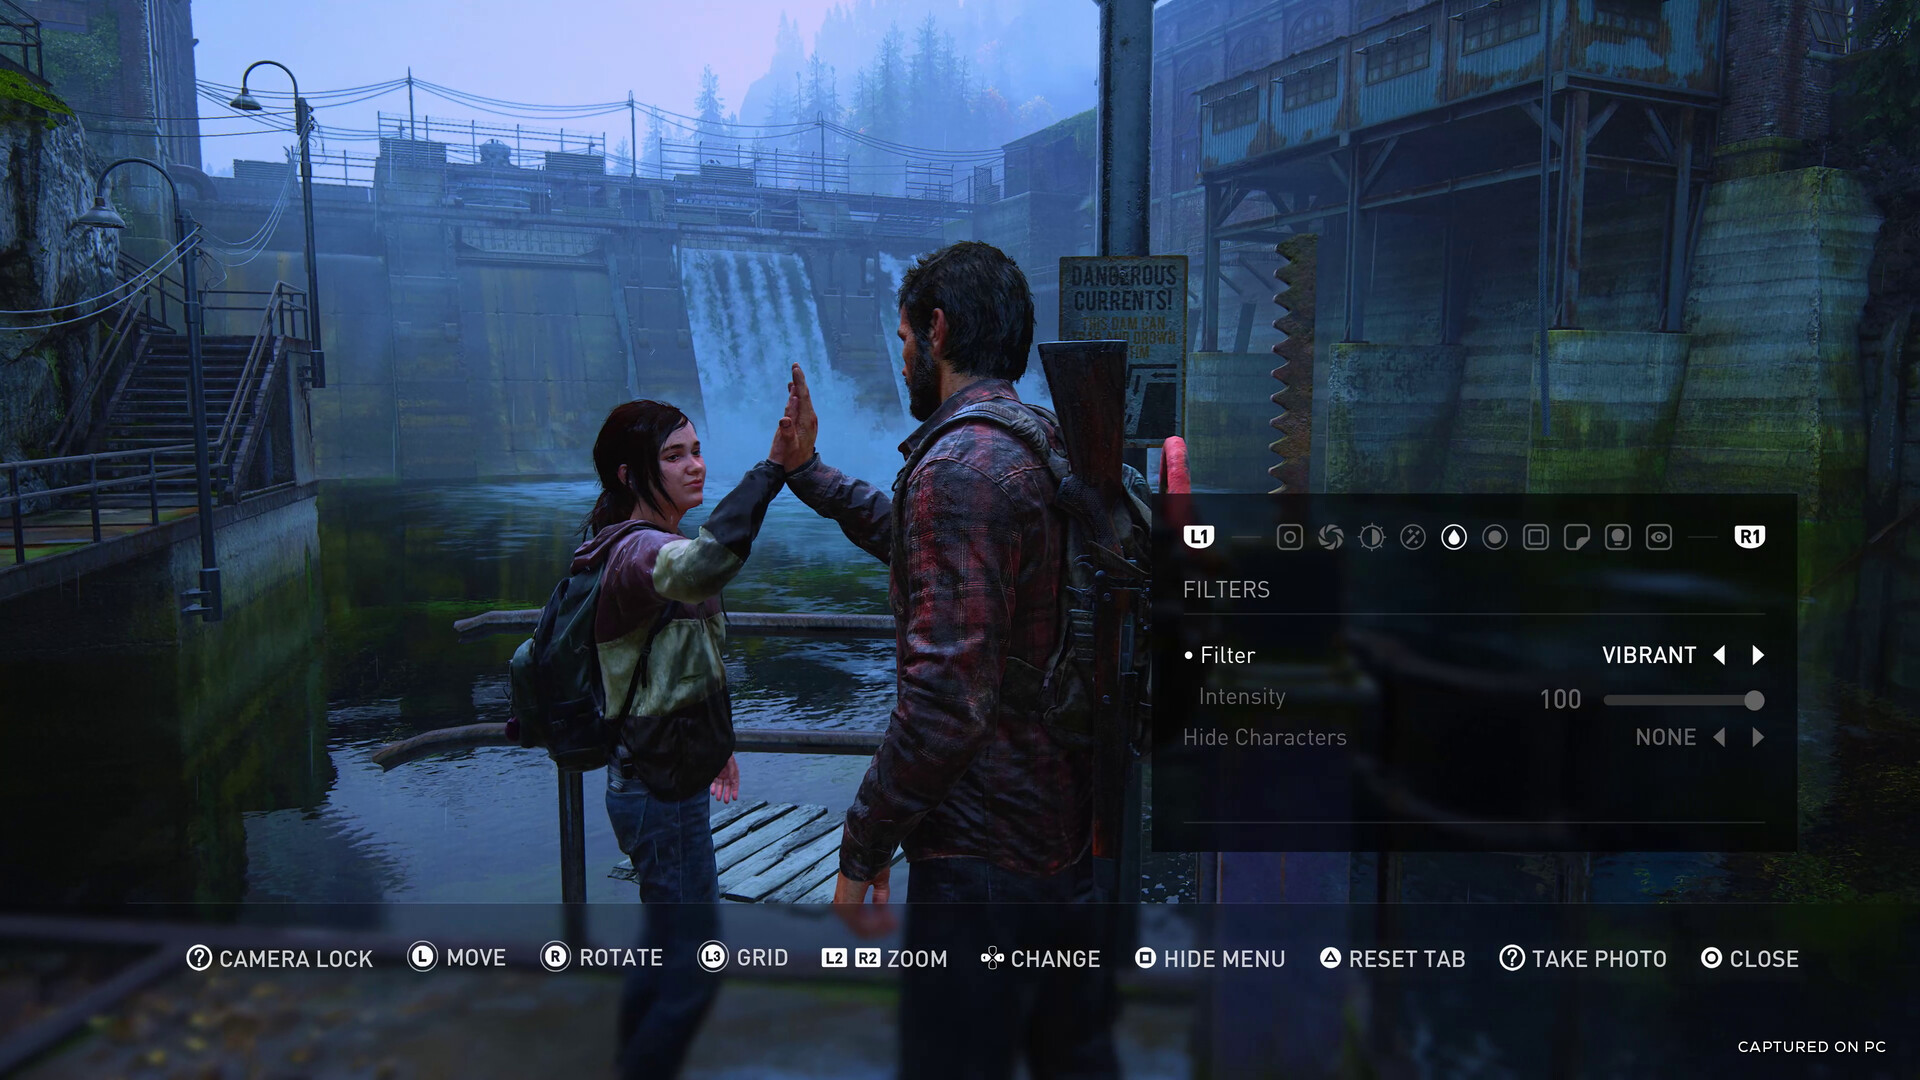 The Last of Us New Multiplayer Game: Release Date, Plot, Details